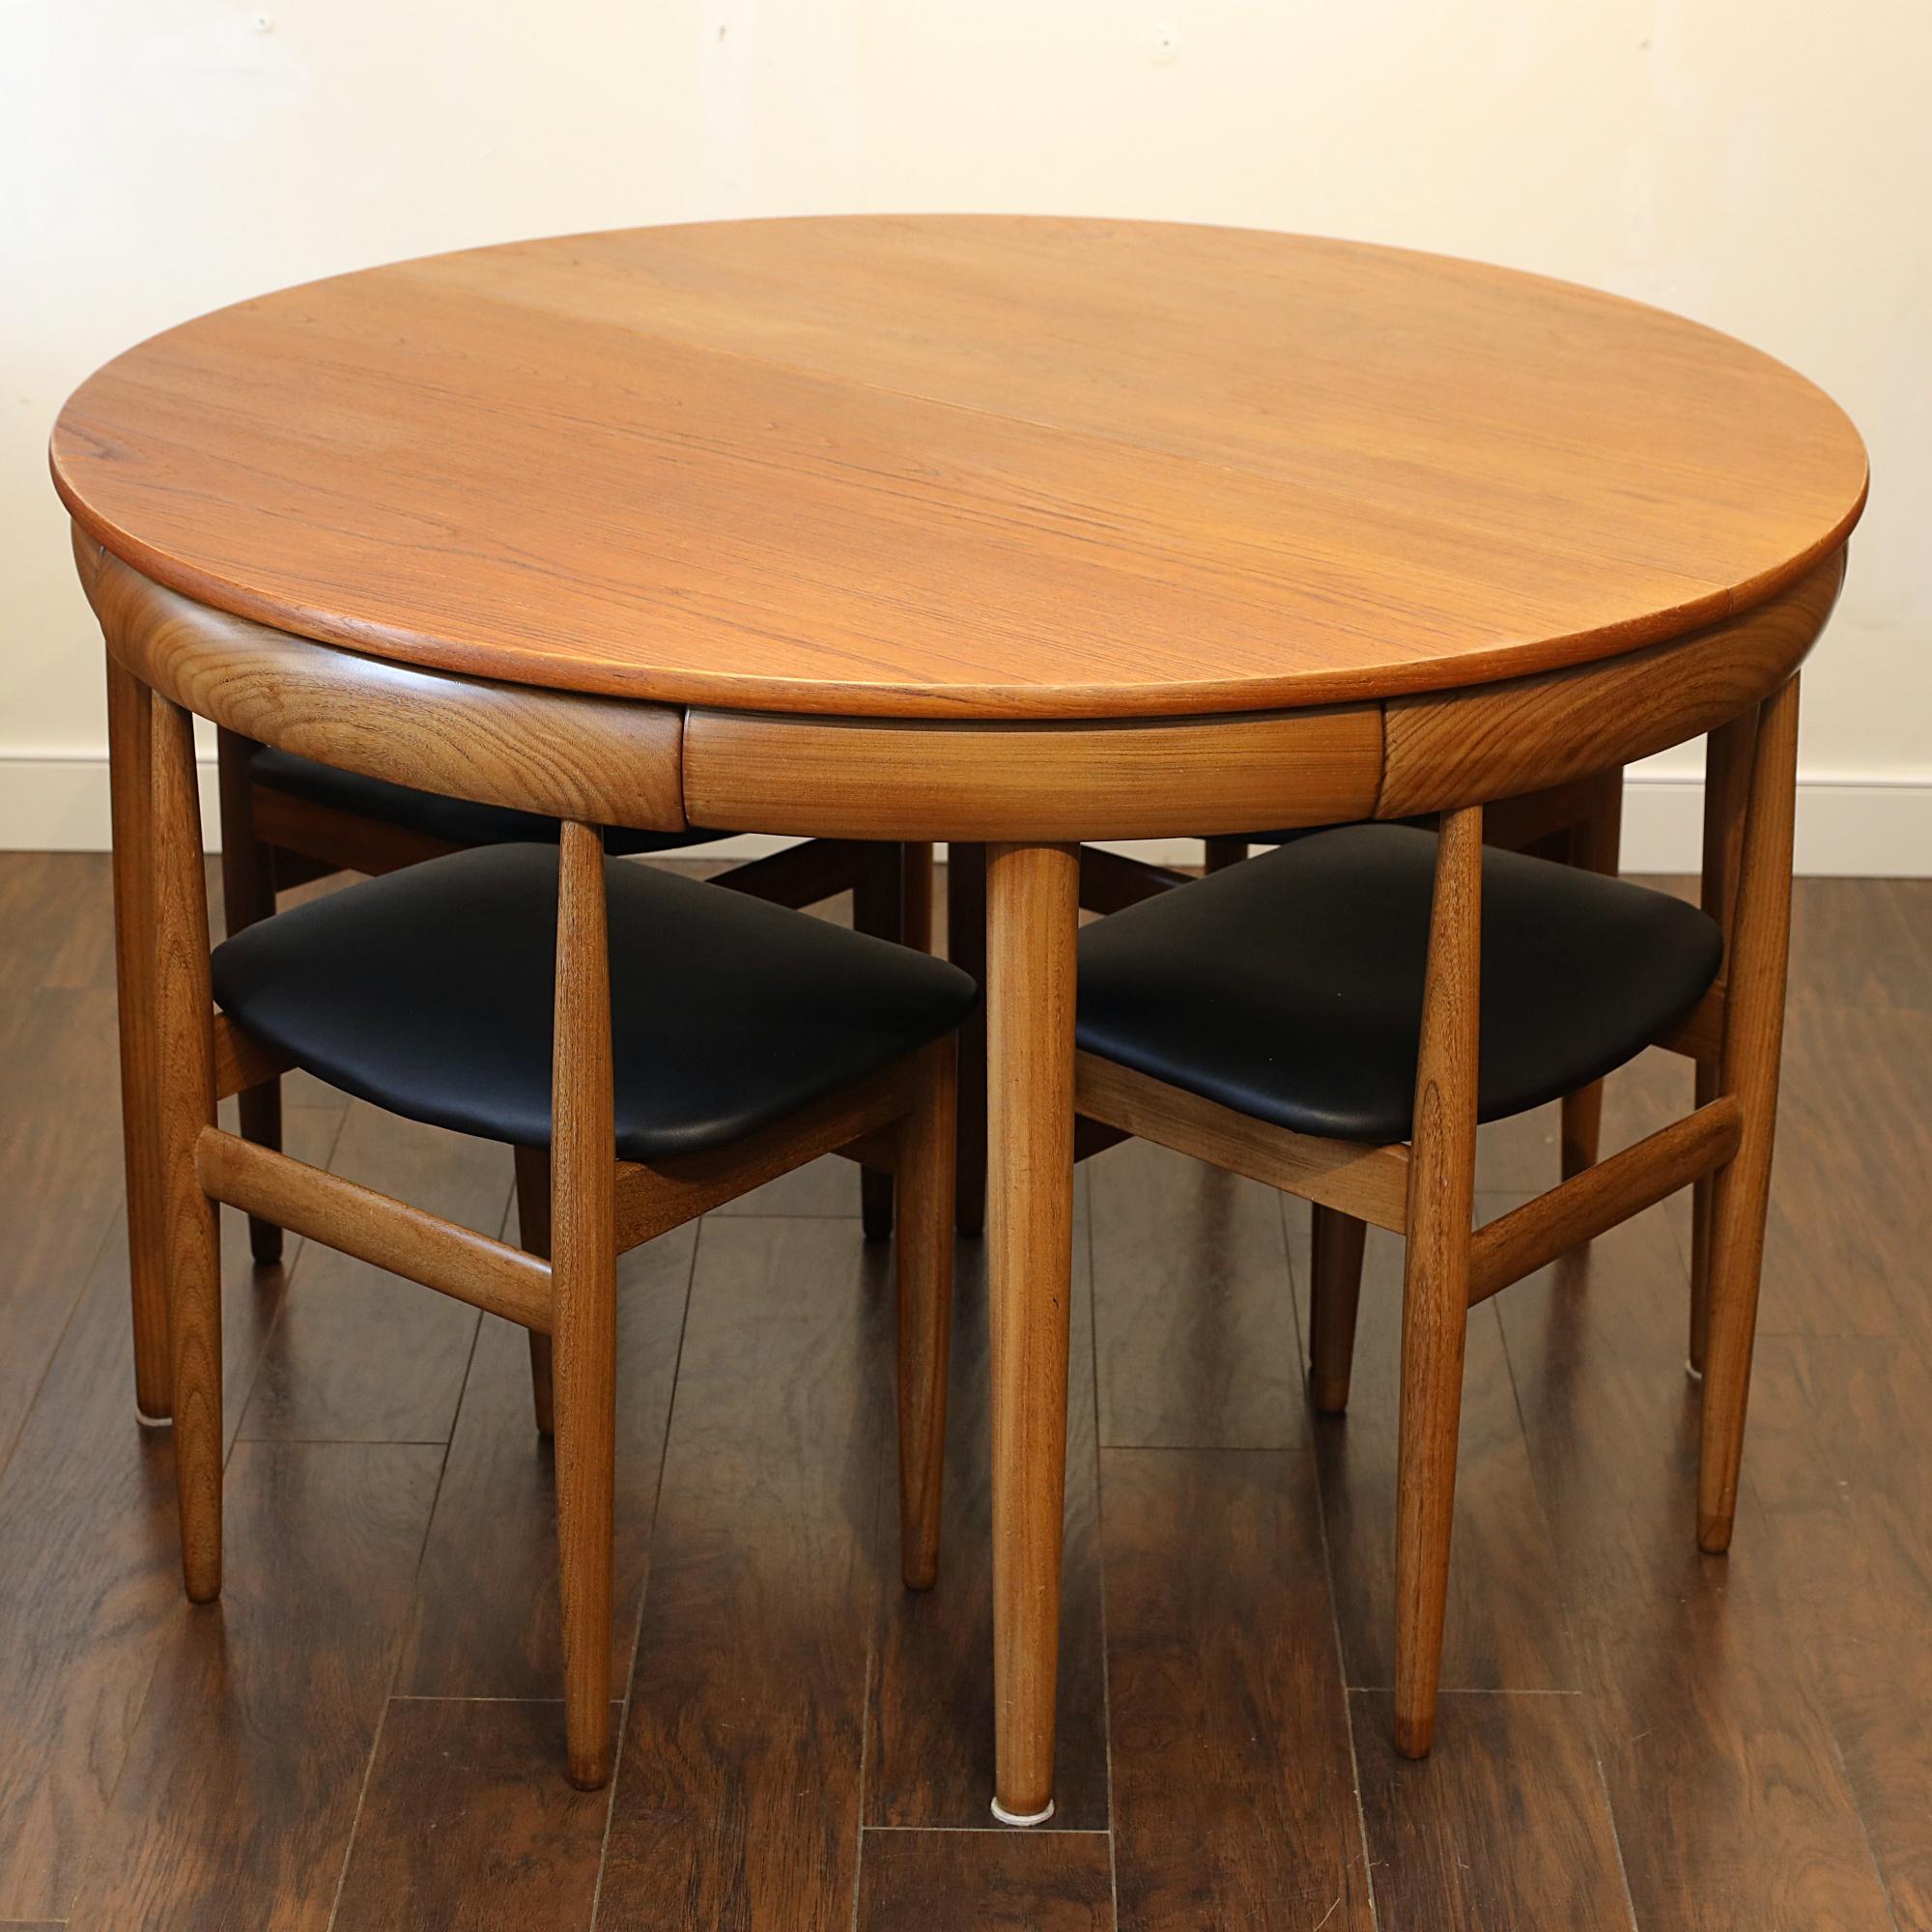 Iconic Hans Olsen dining set for Frem Rojle.
4 of 4 legged chairs and dining table set.
In Excellent Original Condition.
Table top + Folding leaf have been gently and meticulously refinished.
The middle leaf has slightly different colour to the